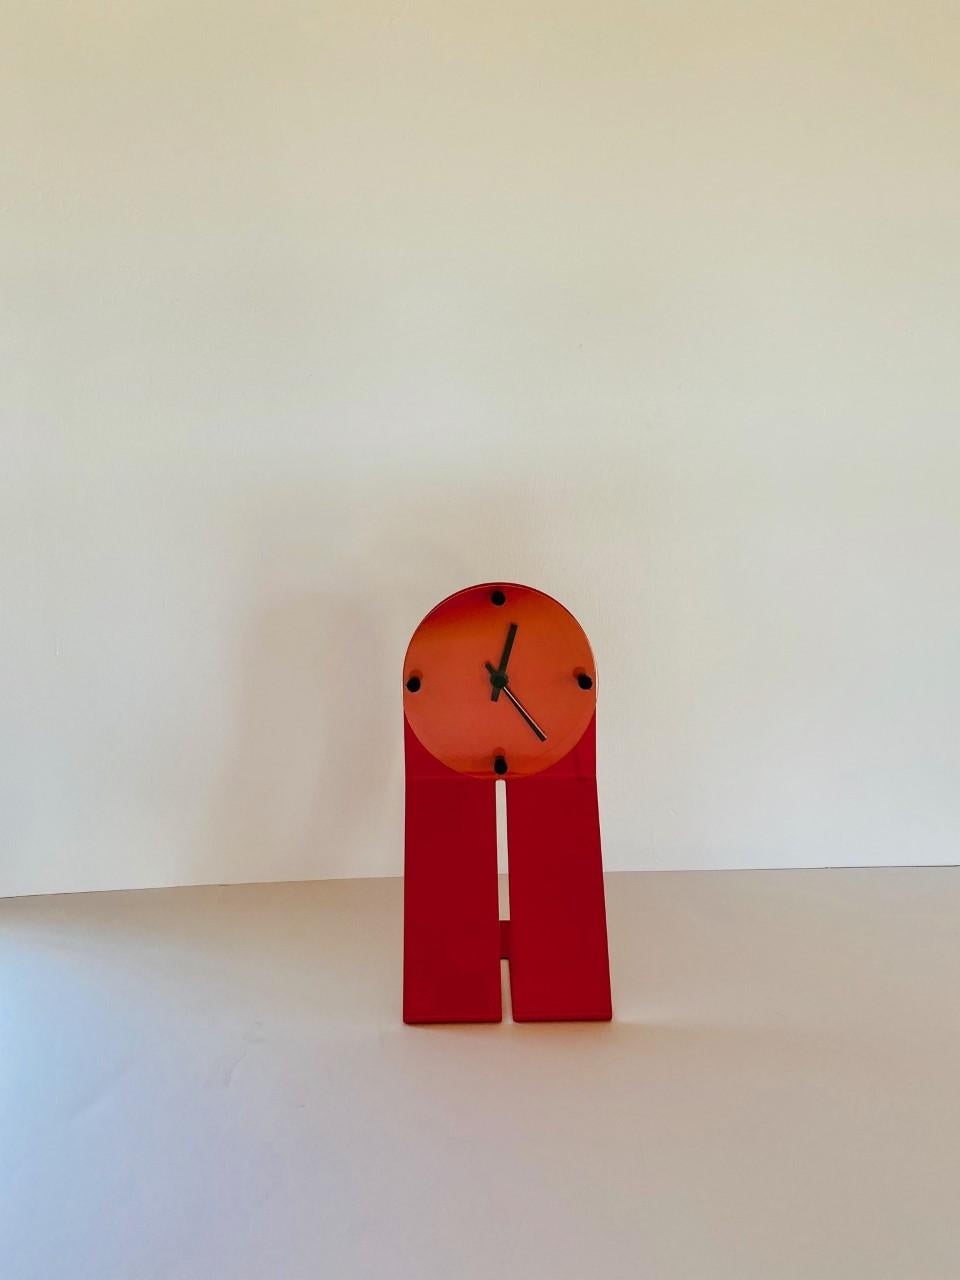 Graphic and high design piece by Seccose. The metal frame is bent to create an effect on profile. The piece is powered coated in a unique orange red color, finished with a plexiglass circle that protects the quartz time mechanism. This piece was